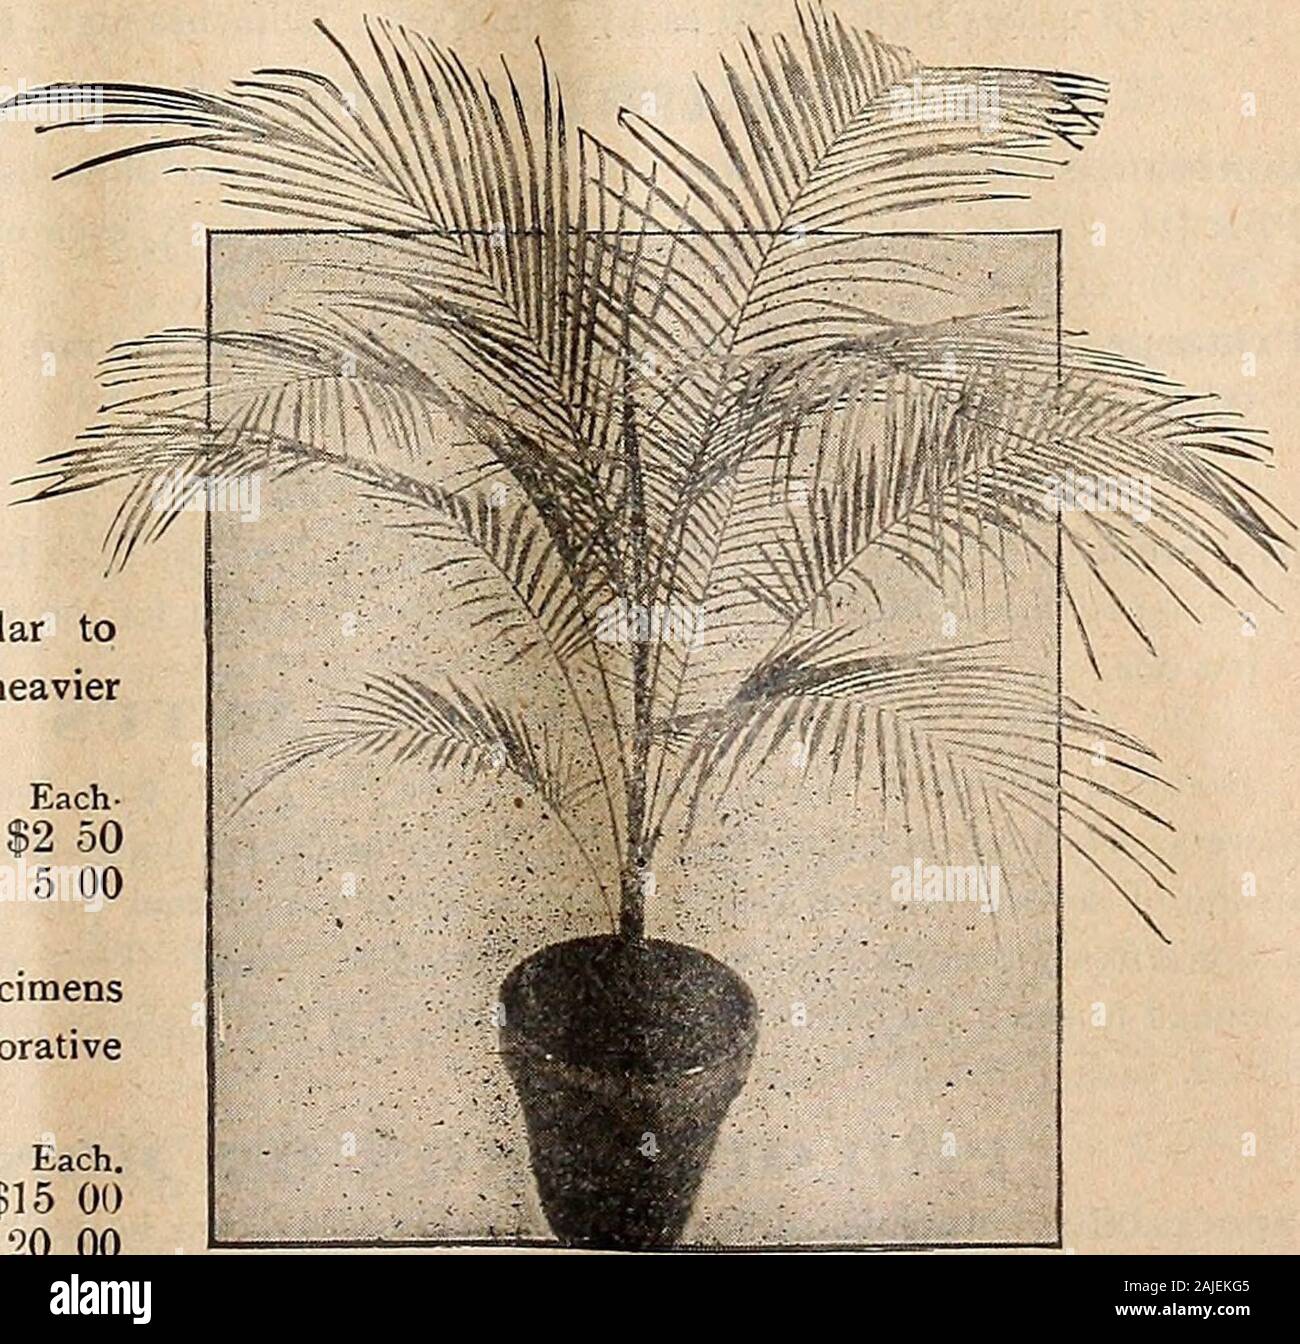 Dreer's autumn catalogue 1918 . 5 00Kentia Forsteriana. This splendid variety is very similar to K. Belmoreana, but of stronger growth, with broader, heavierfoliage.Inch Pots. Inches High, 3 12 4 15 5 24Kentia Forsteriana {Made-up Plants). These are specimens made by planting several plants together; very useful decorativespecimens. Inch Tubs. Inches High. Each. Inch Tubs. Inches High :haracterized... $0 50 each ... 1 00 ... 1 50 3 000050 5 7 3-inch pots, 6 to 8 in. high, nicely characterized... 4 12 5 « 15Specimens in 6-in. pots, 1^ ft. high. 8 tubs, 2 * 10 2§ Tlirinax Floridana, 4-inch pots, Stock Photo